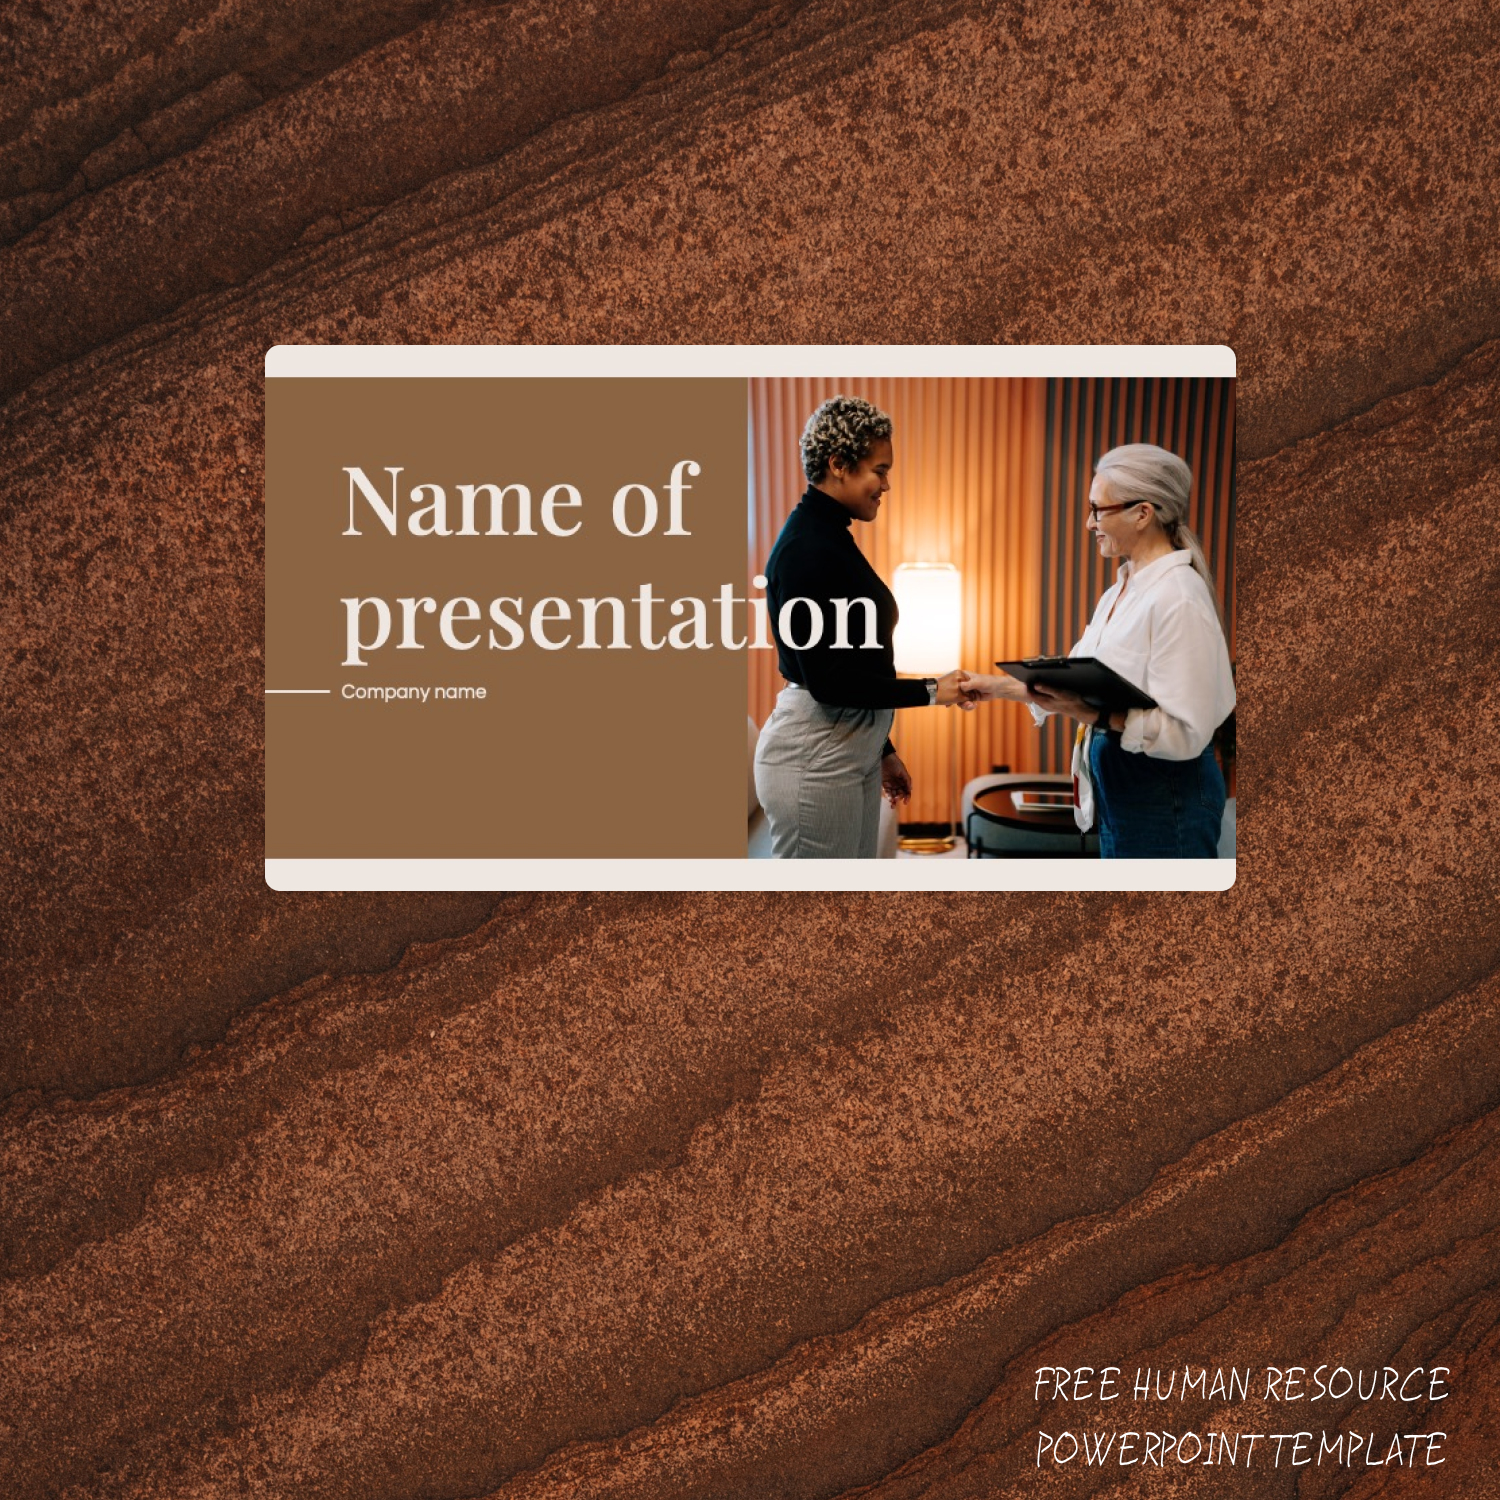 Prints of human resource powerpoint template.